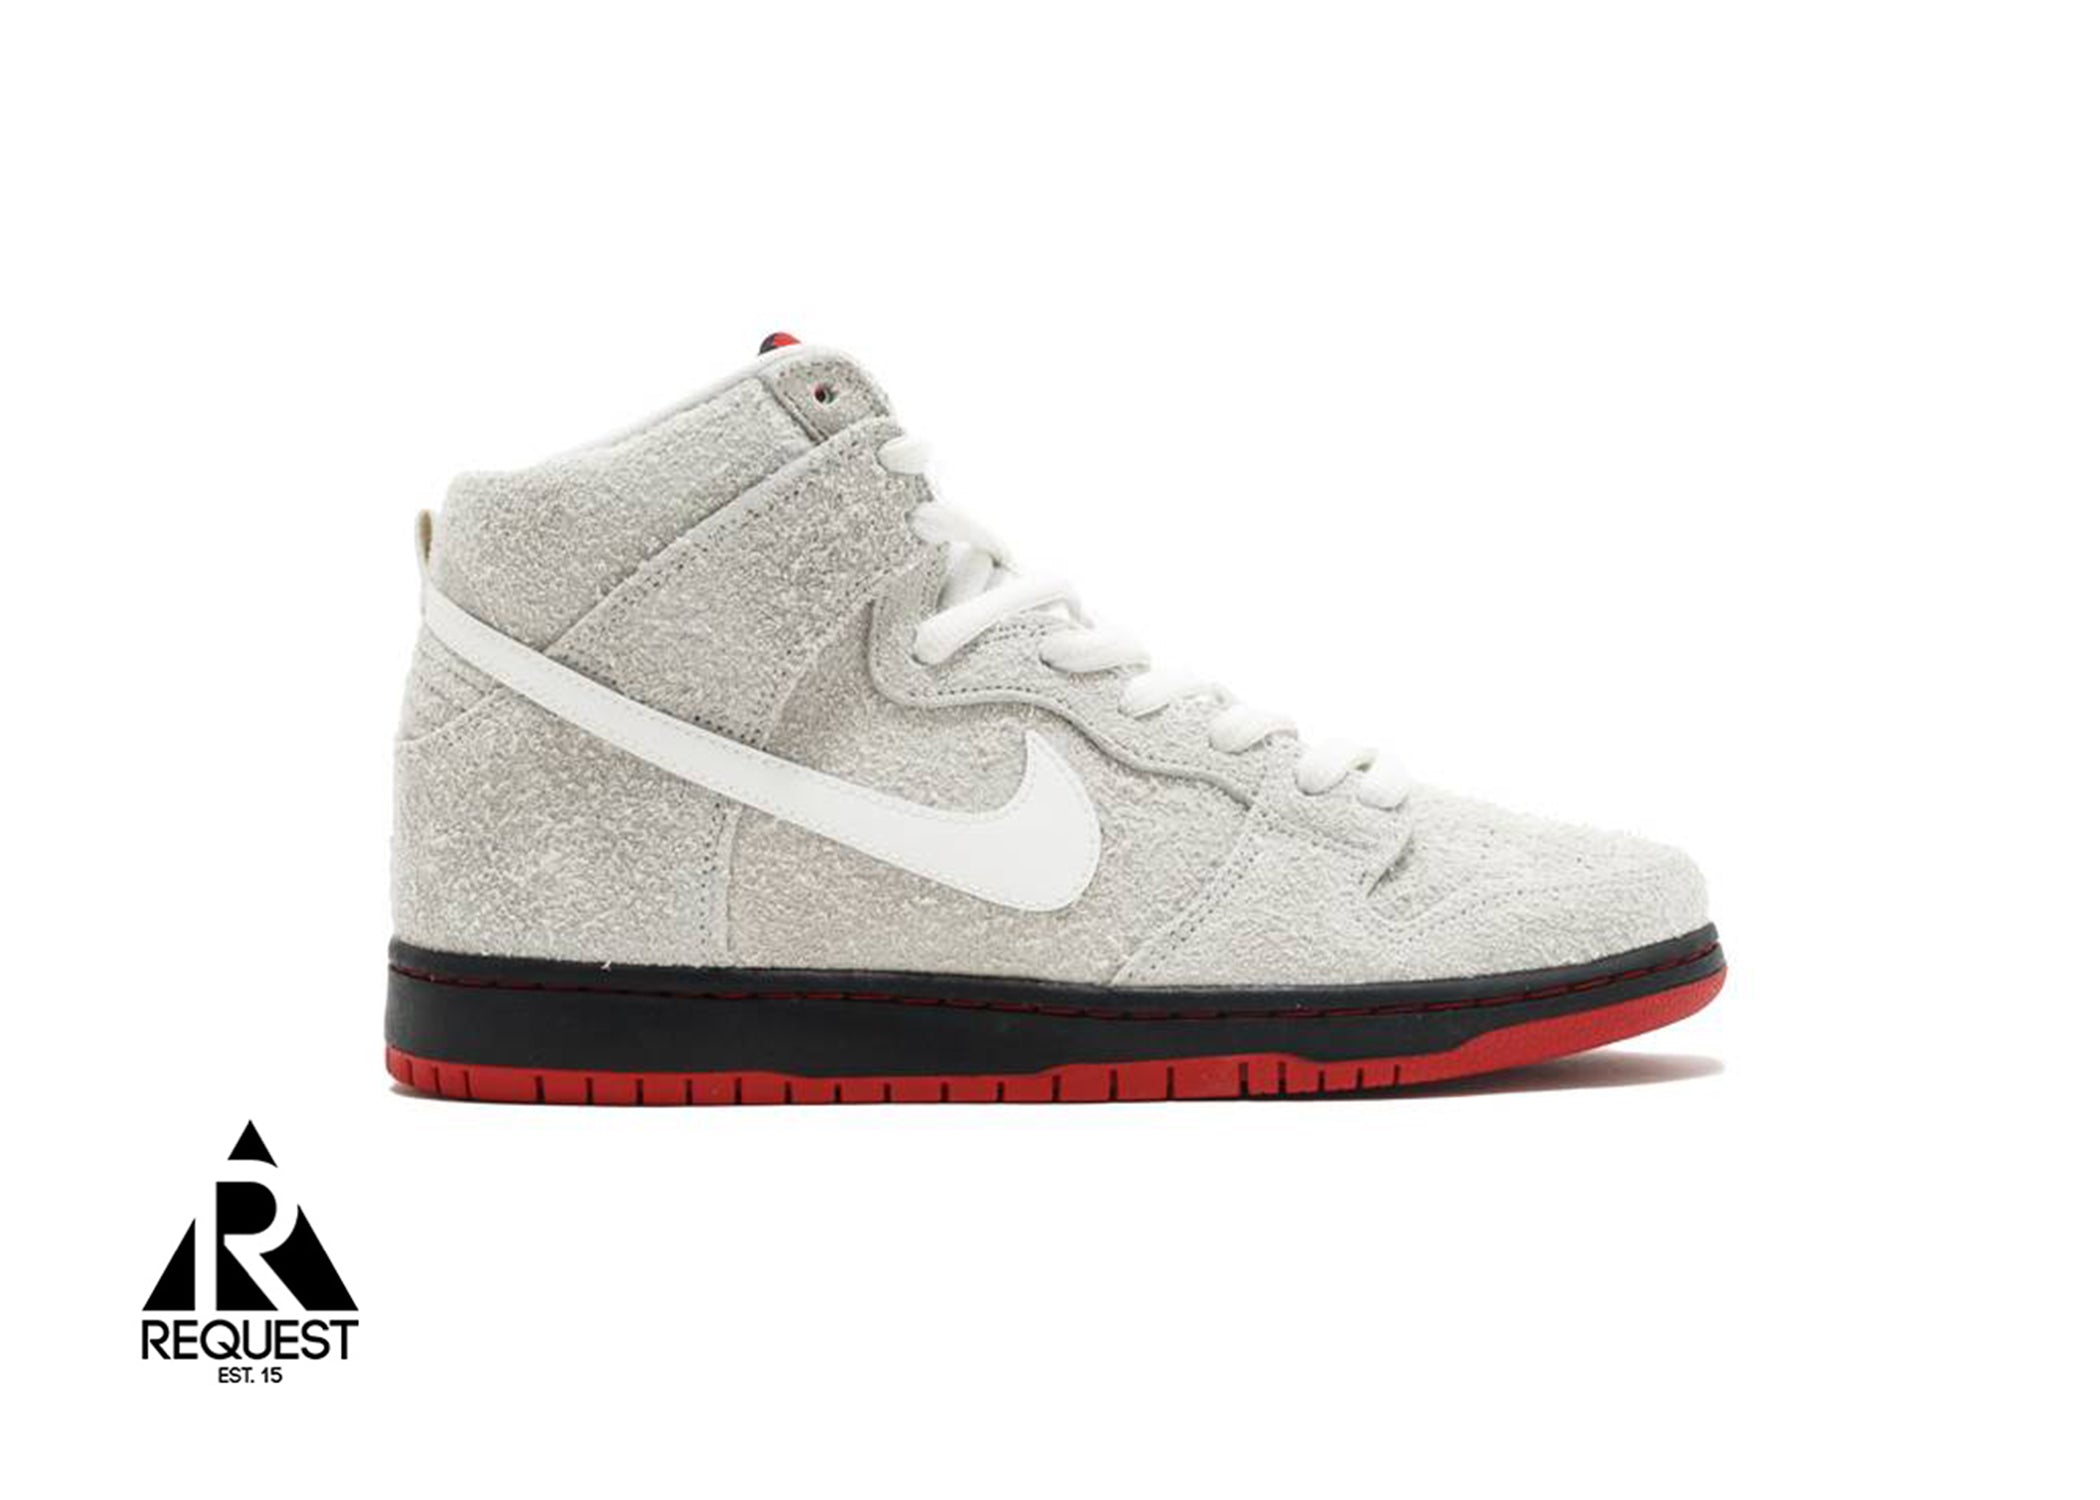 Nike Dunk SB High “Wolf In Sheep’s Clothing”